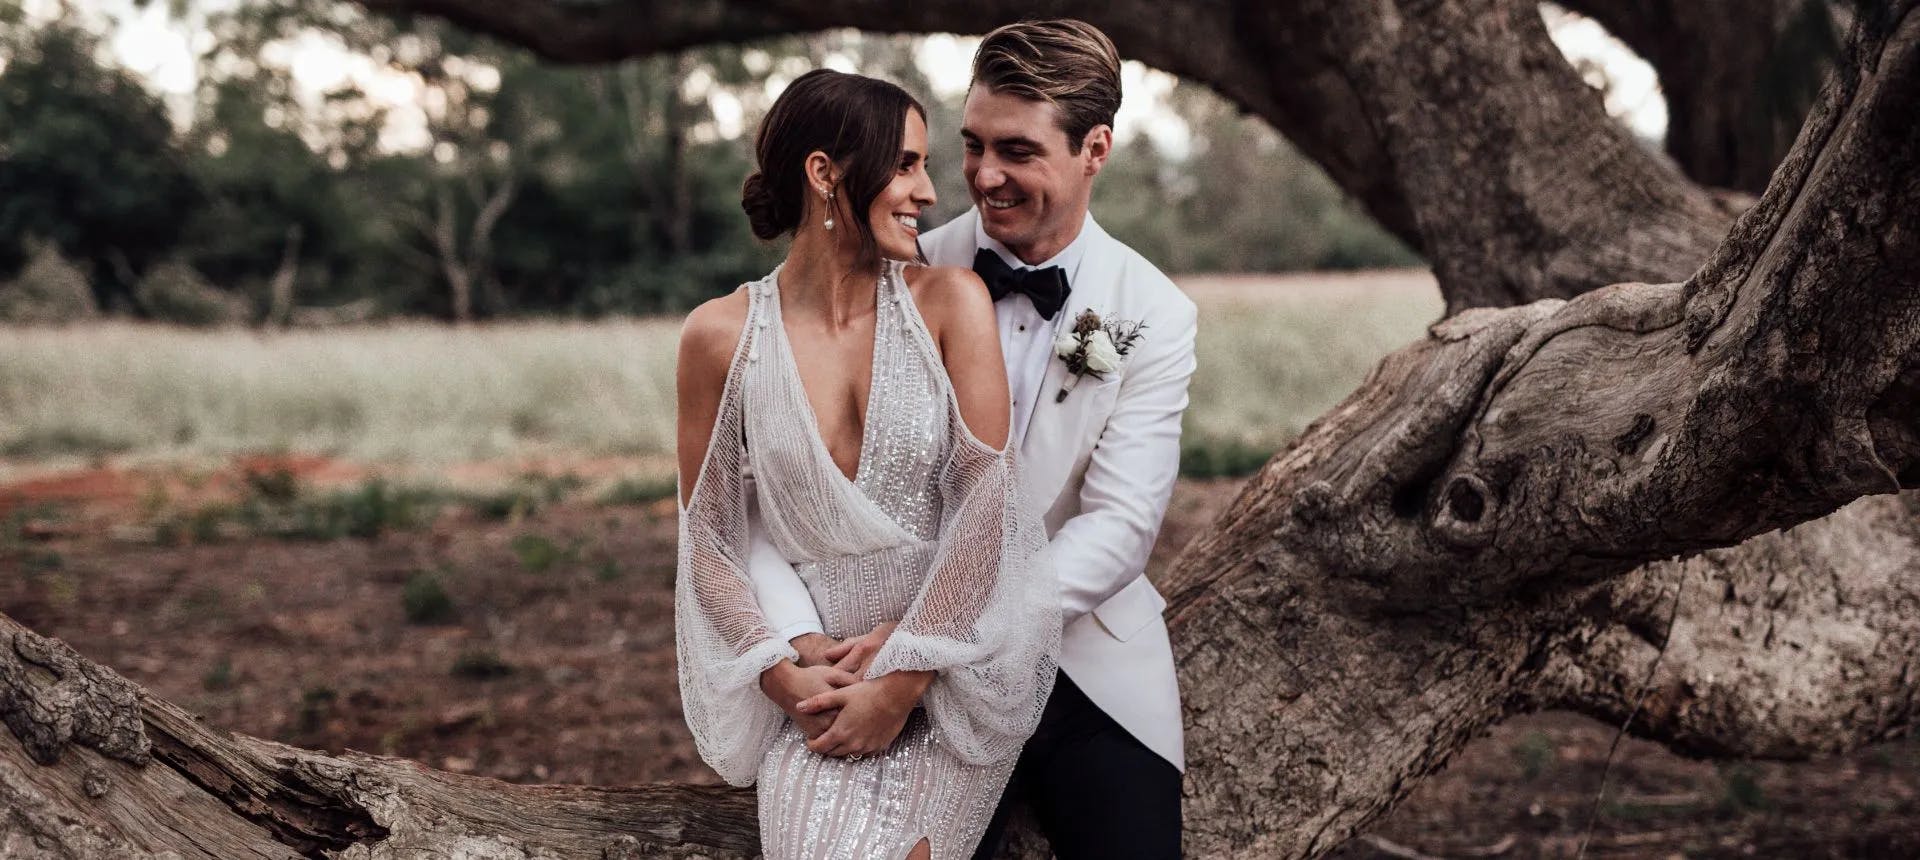 A couple, dressed in wedding attire, sits on a large tree branch. The bride wears a sparkling white gown with a deep V-neck and sheer sleeves, while the groom wears a white tuxedo with a black bow tie. They are looking at each other and smiling, surrounded by nature.